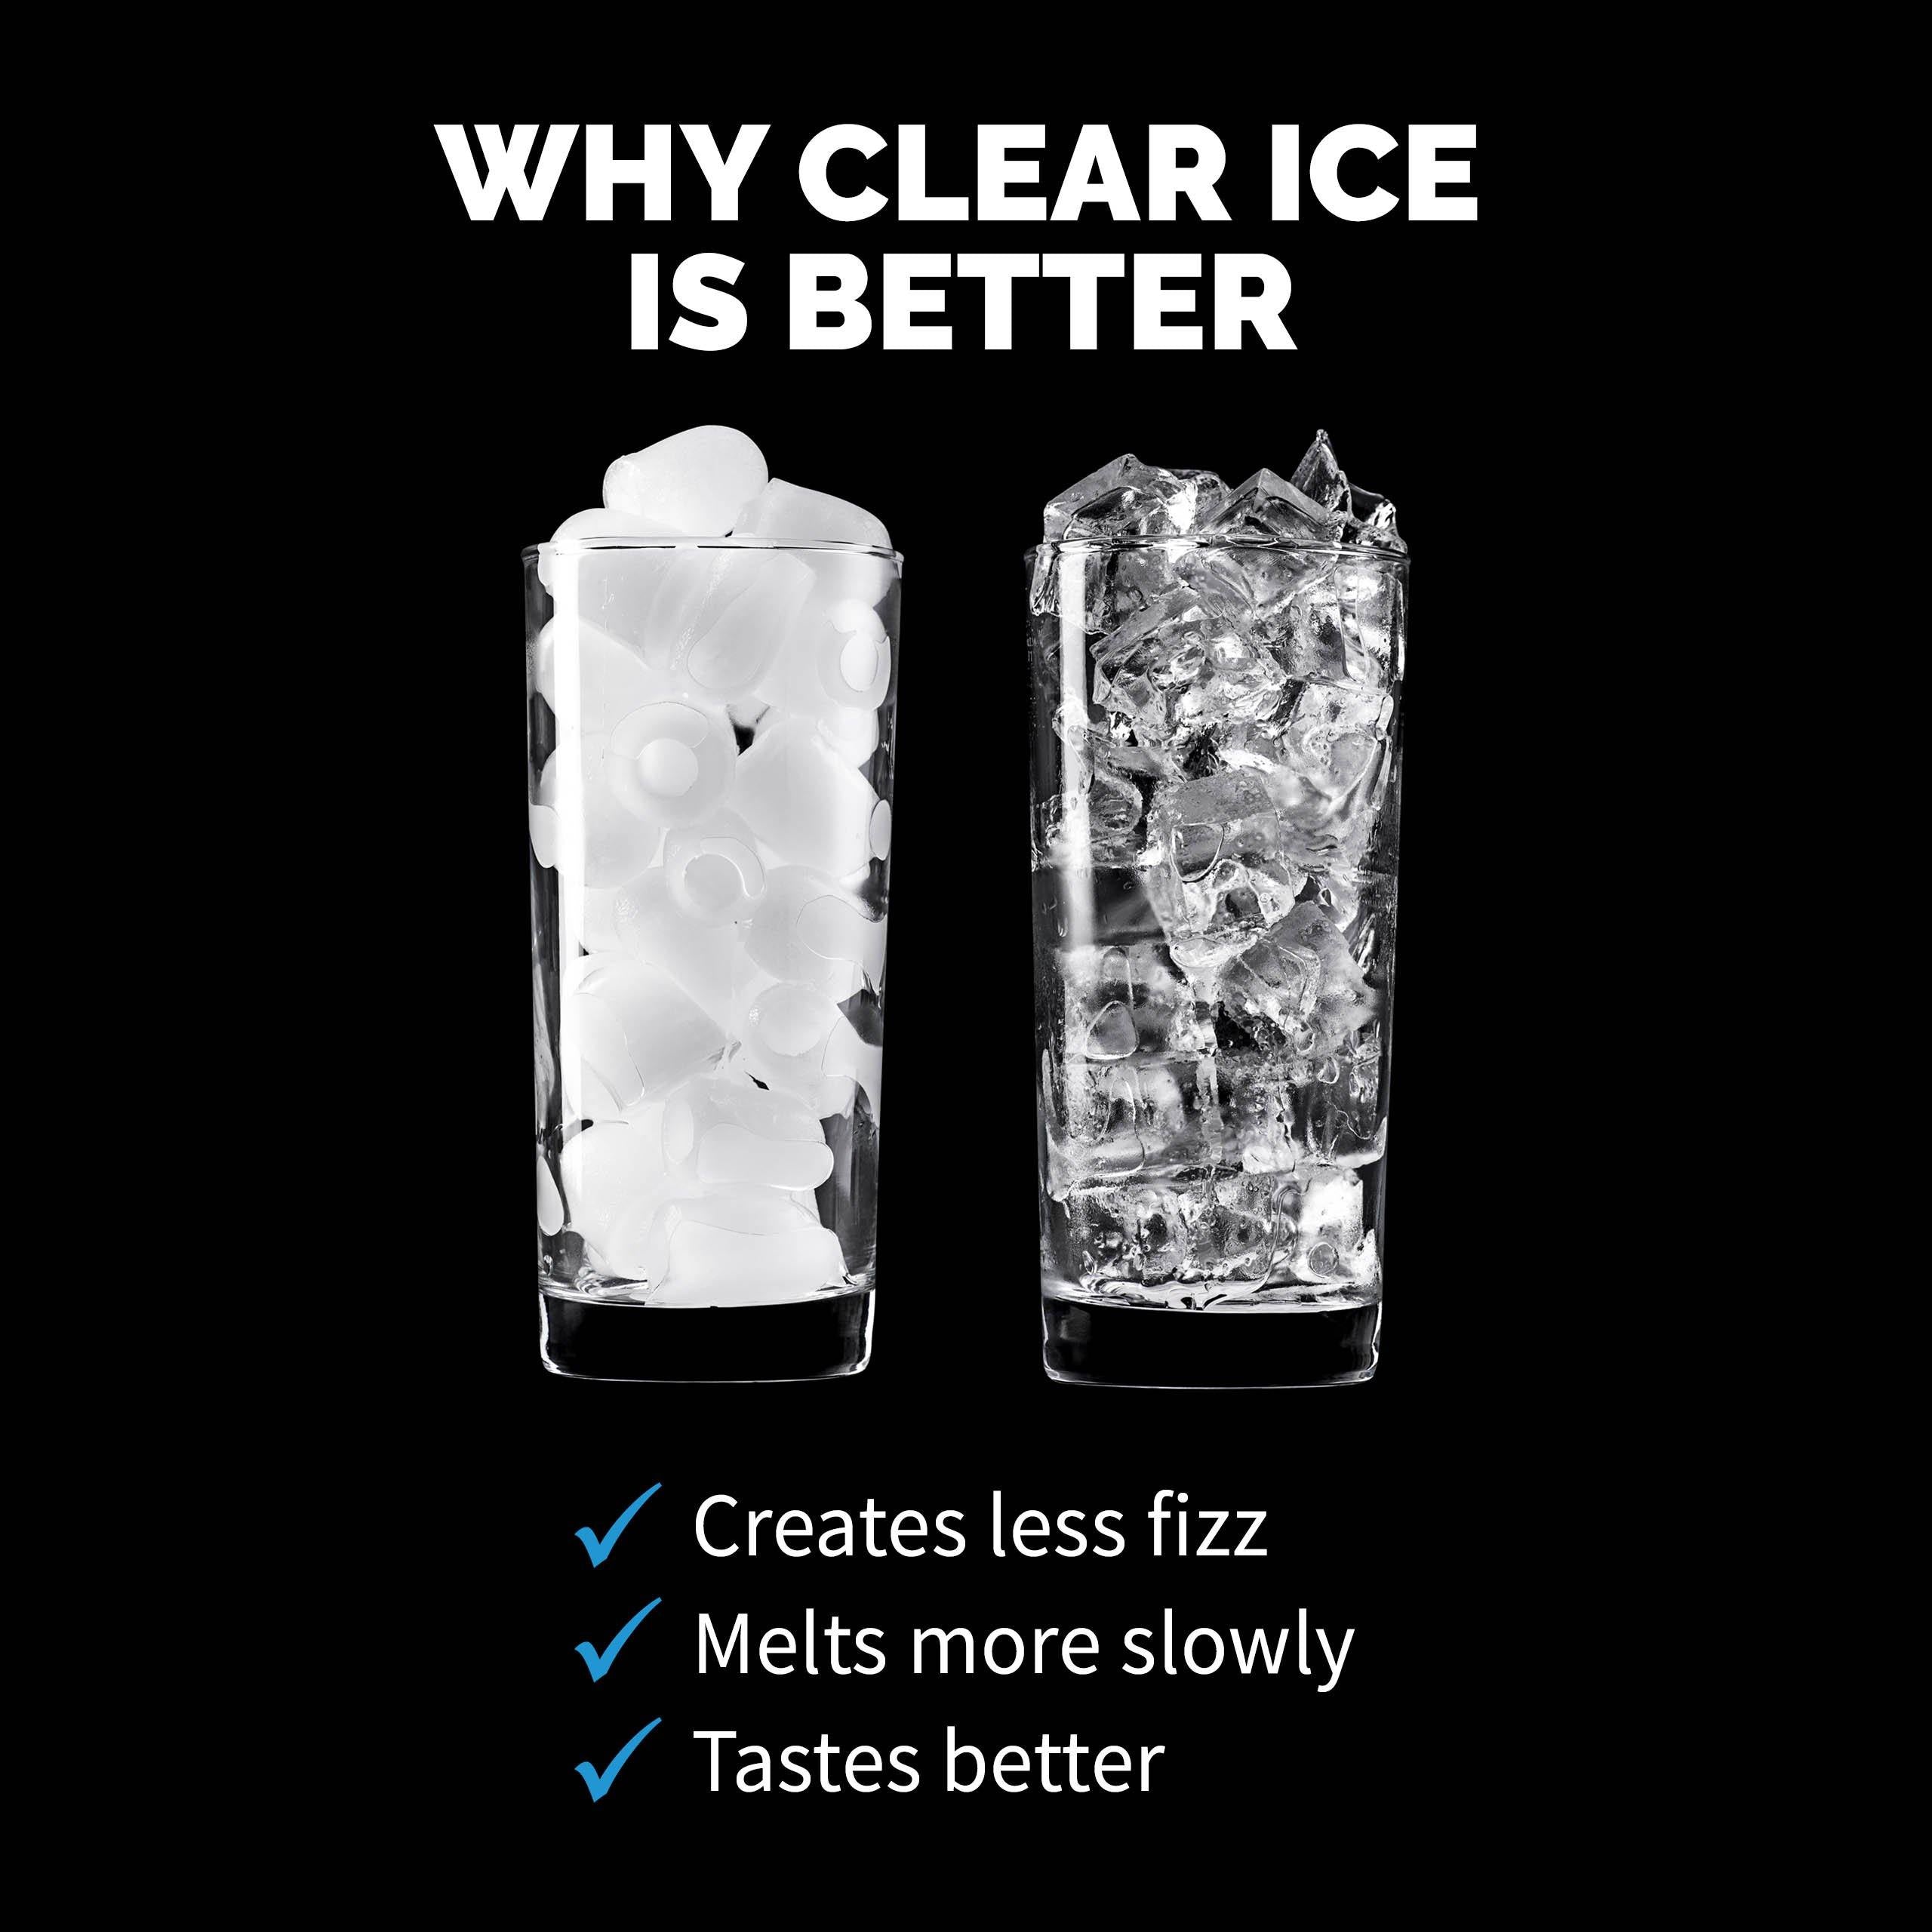 https://www.newair.com/cdn/shop/products/03-newair-countertop-clear-ice-maker-clearice40-why-clear-ice-is-better_919eb0cb-67c4-488b-b8b9-1a679c86cedc.jpg?v=1616177593